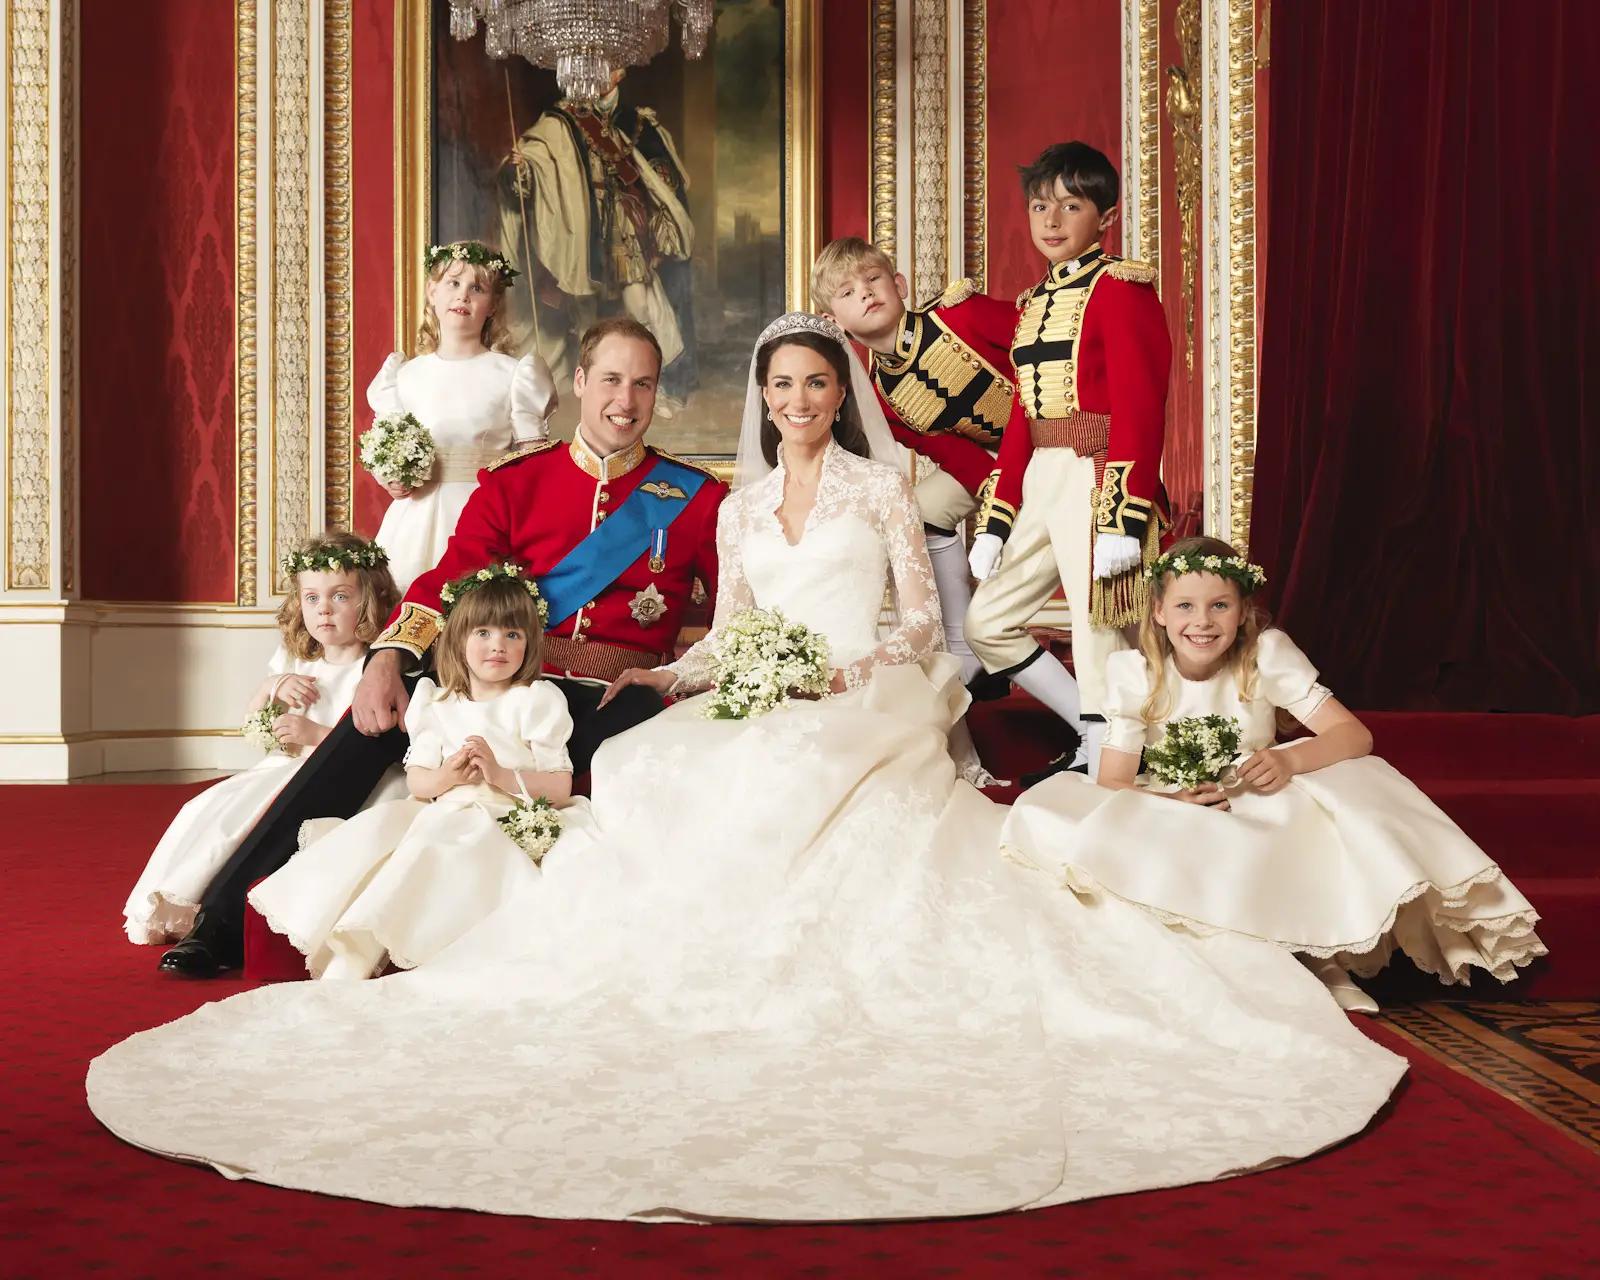 The Royal Wedding at Buckingham Palace on 29th April 2011: The Bride and Groom, TRH The Duke and Duchess of Cambridge in the centre with attendants, (clockwise from bottom right) The Hon. Margarita Armstrong-Jones, Miss Eliza Lopes, Miss Grace van Cutsem, Lady Louise Windsor, Master Tom Pettifer, Master William Lowther-Pinkerton, Taken in the Throne Room. Picture Credit: Photograph by Hugo Burnand